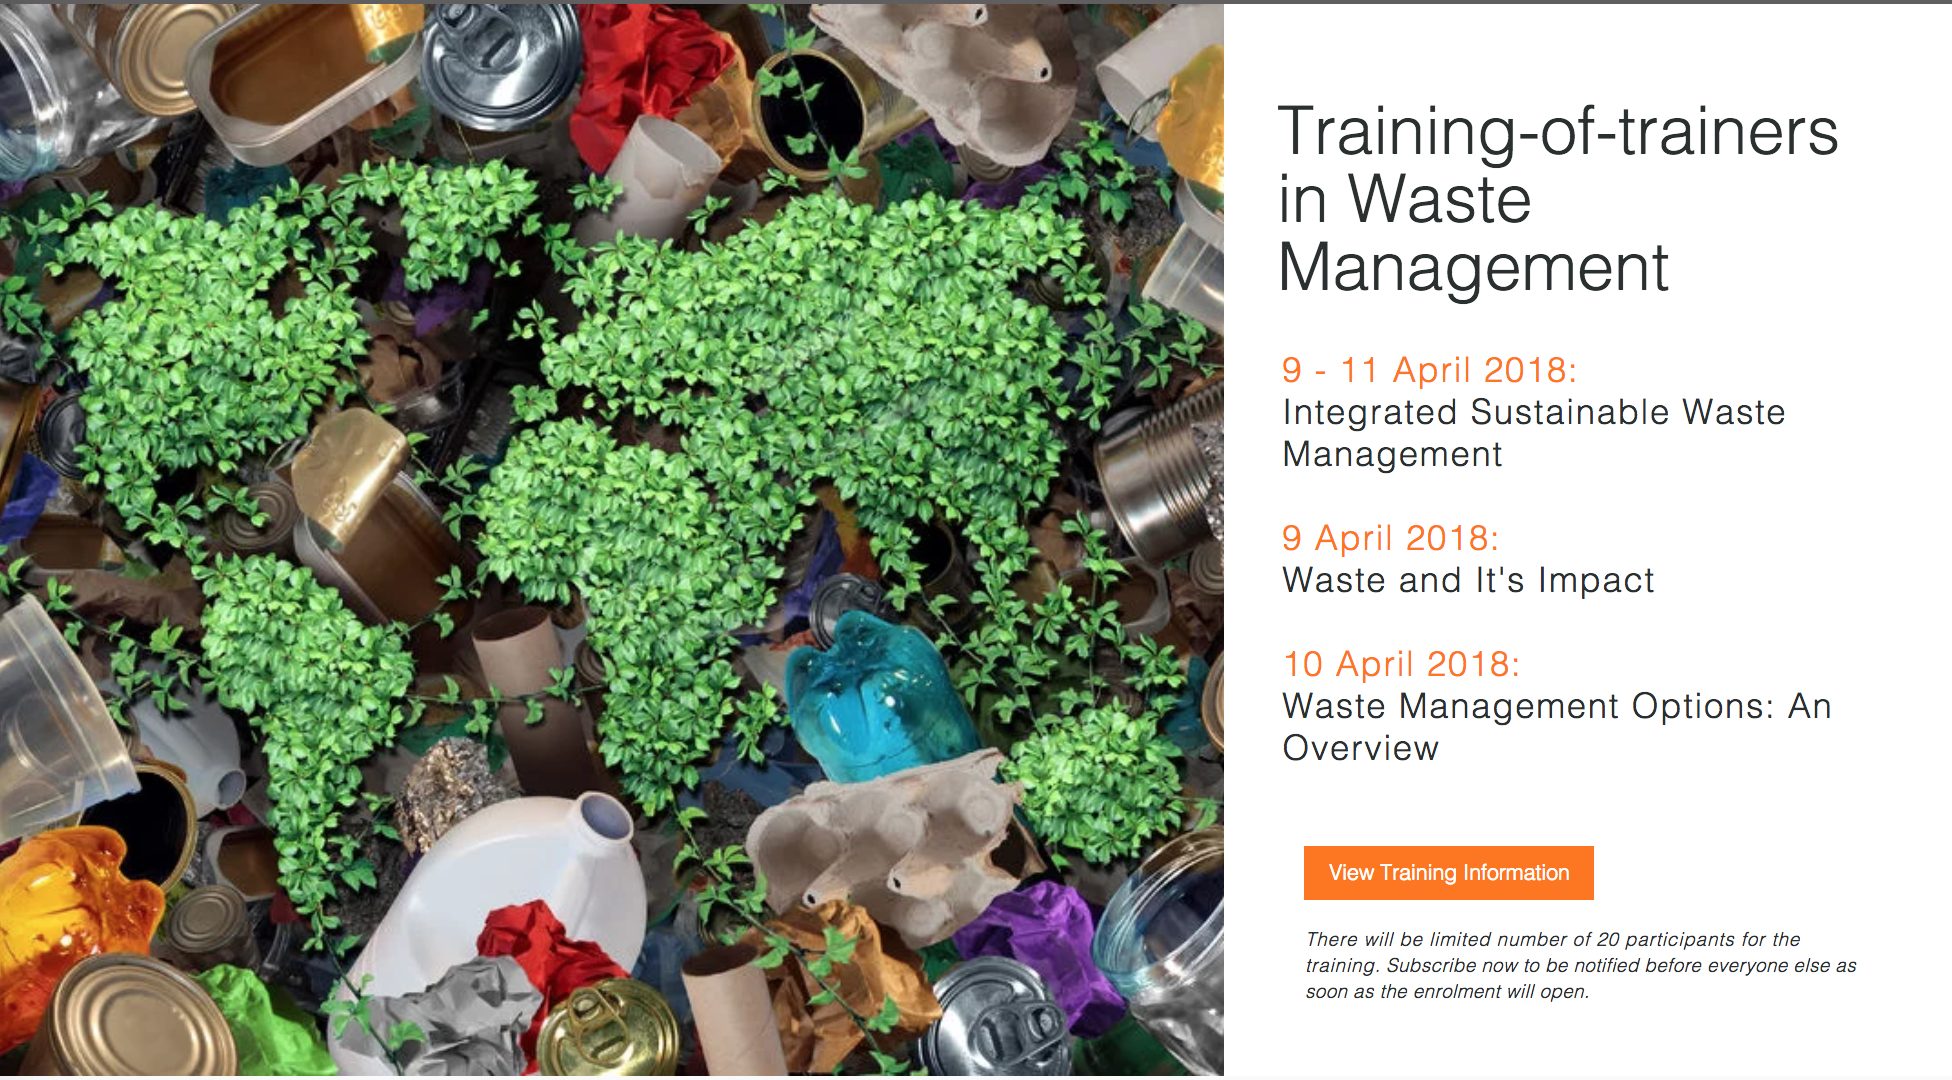 Training-of-trainers in Waste Management